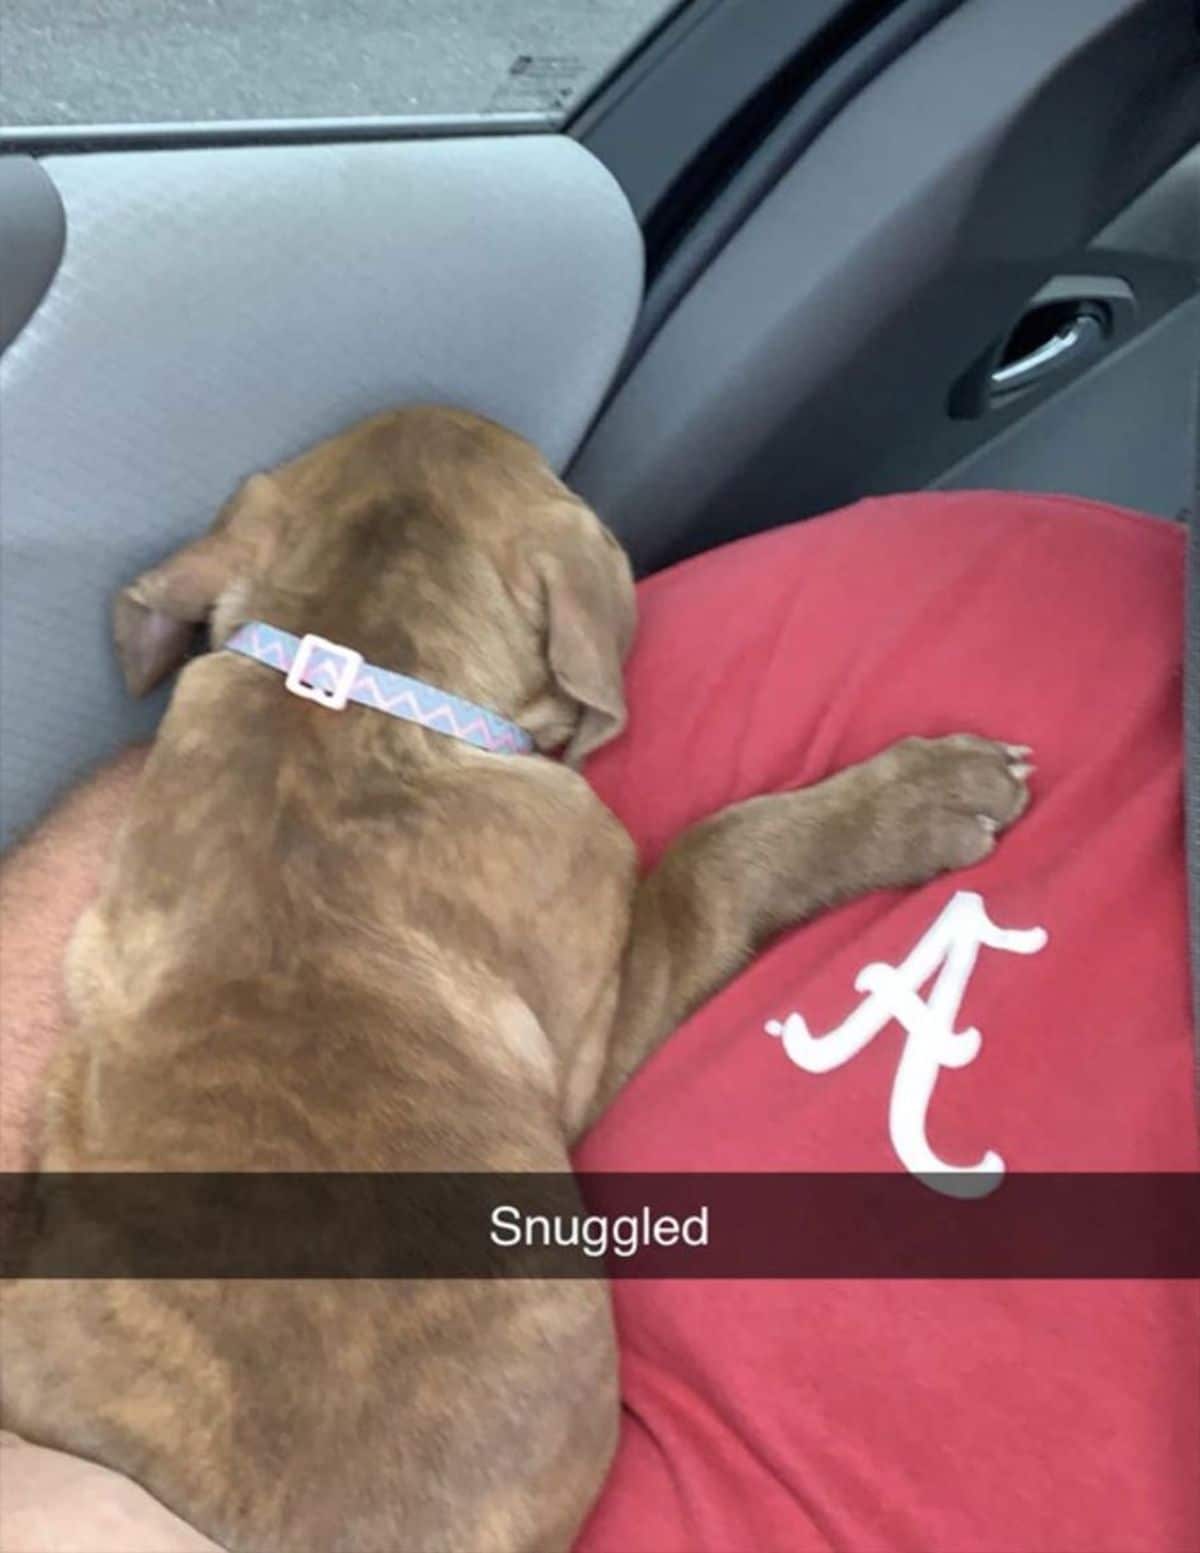 brown dog sleeping held by a man inside a vehicle with a caption saying Snuggled